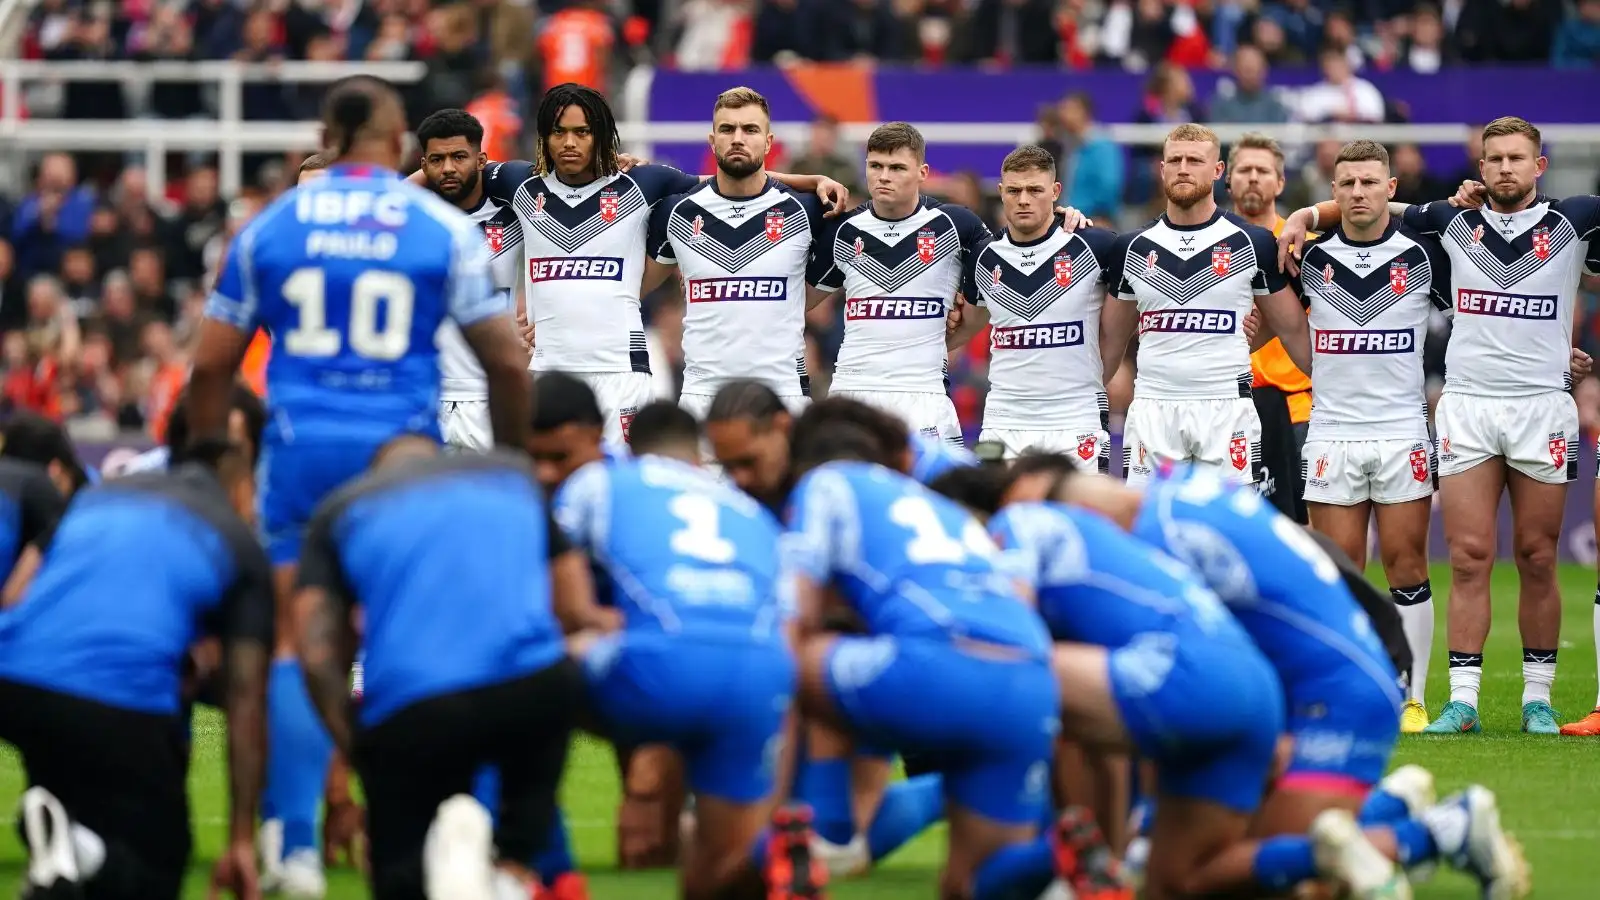 Samoa reject England invitation for 2024 test series; Shaun Wane’s side ‘exploring all options’ ahead of Australia tour in 2025